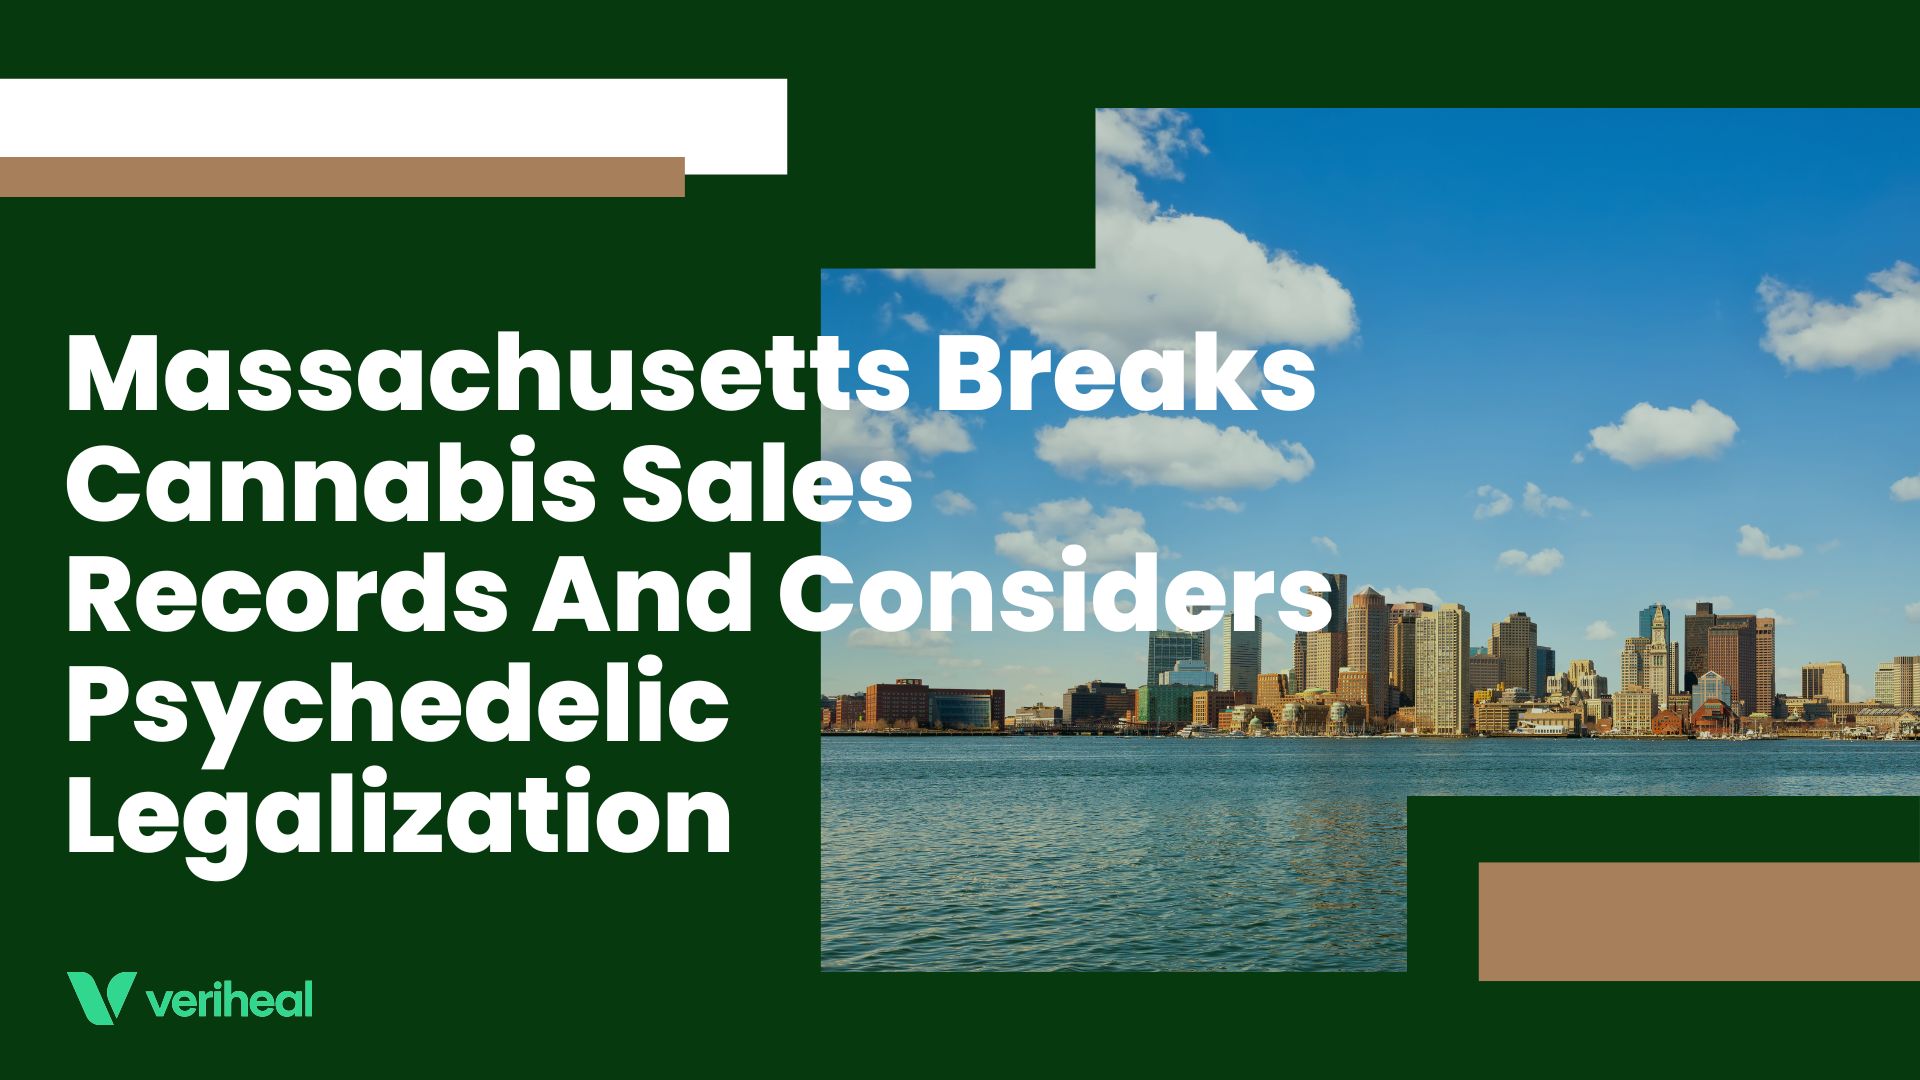 Massachusetts Breaks Cannabis Sales Records And Considers Psychedelic Legalization